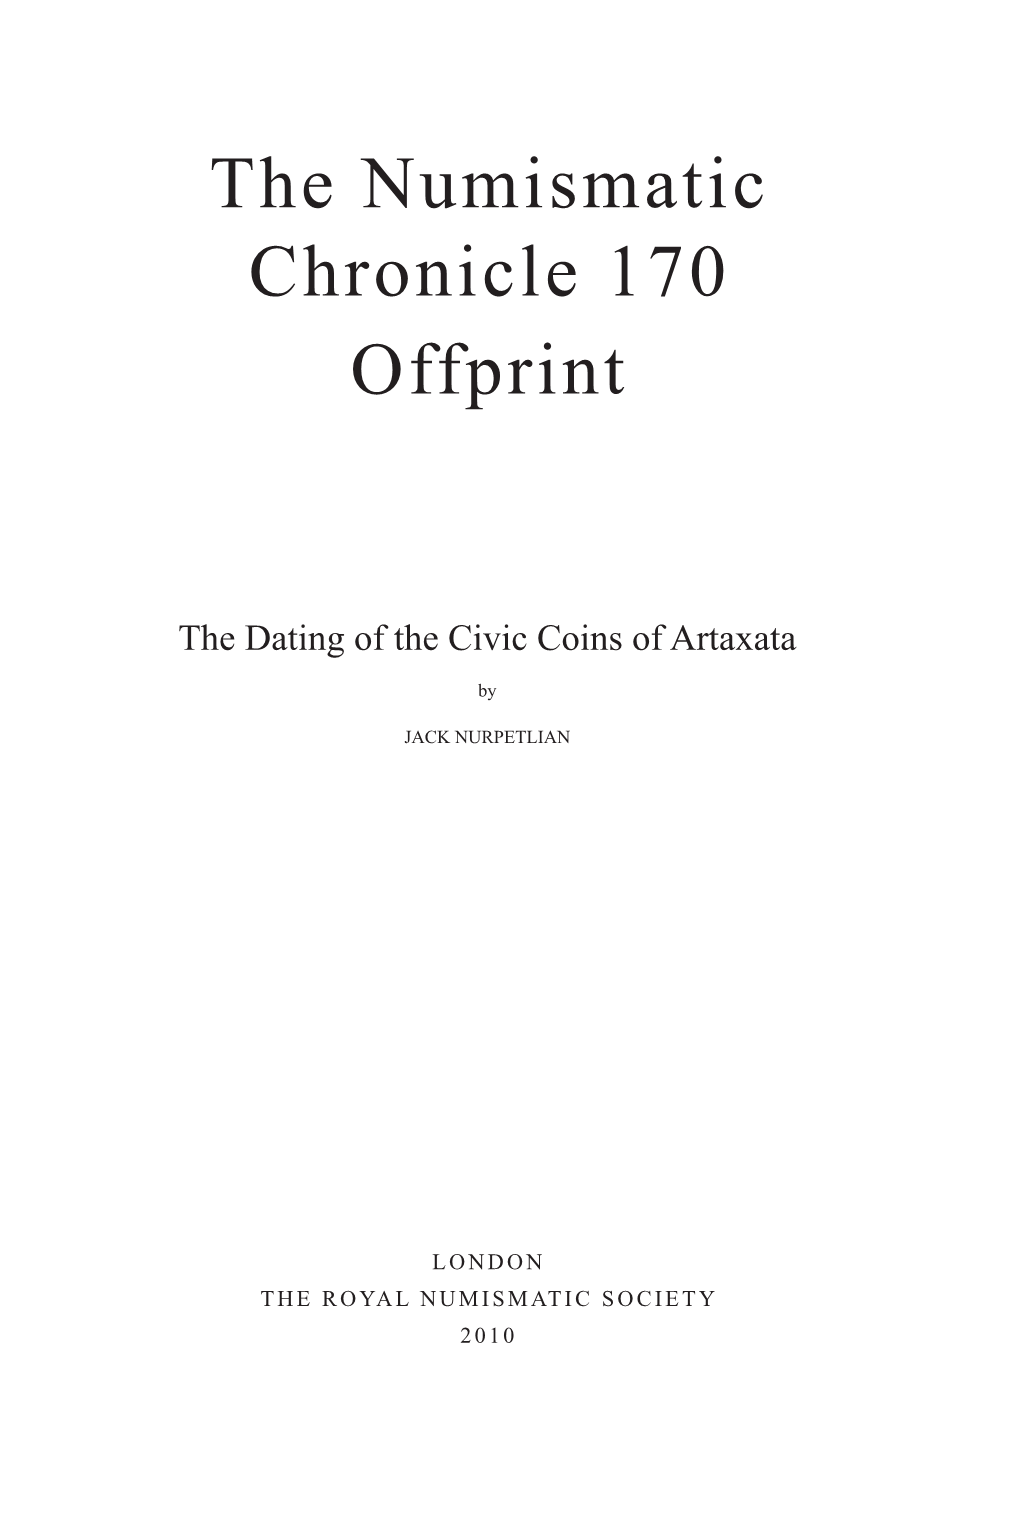 The Numismatic Chronicle 170 Offprint